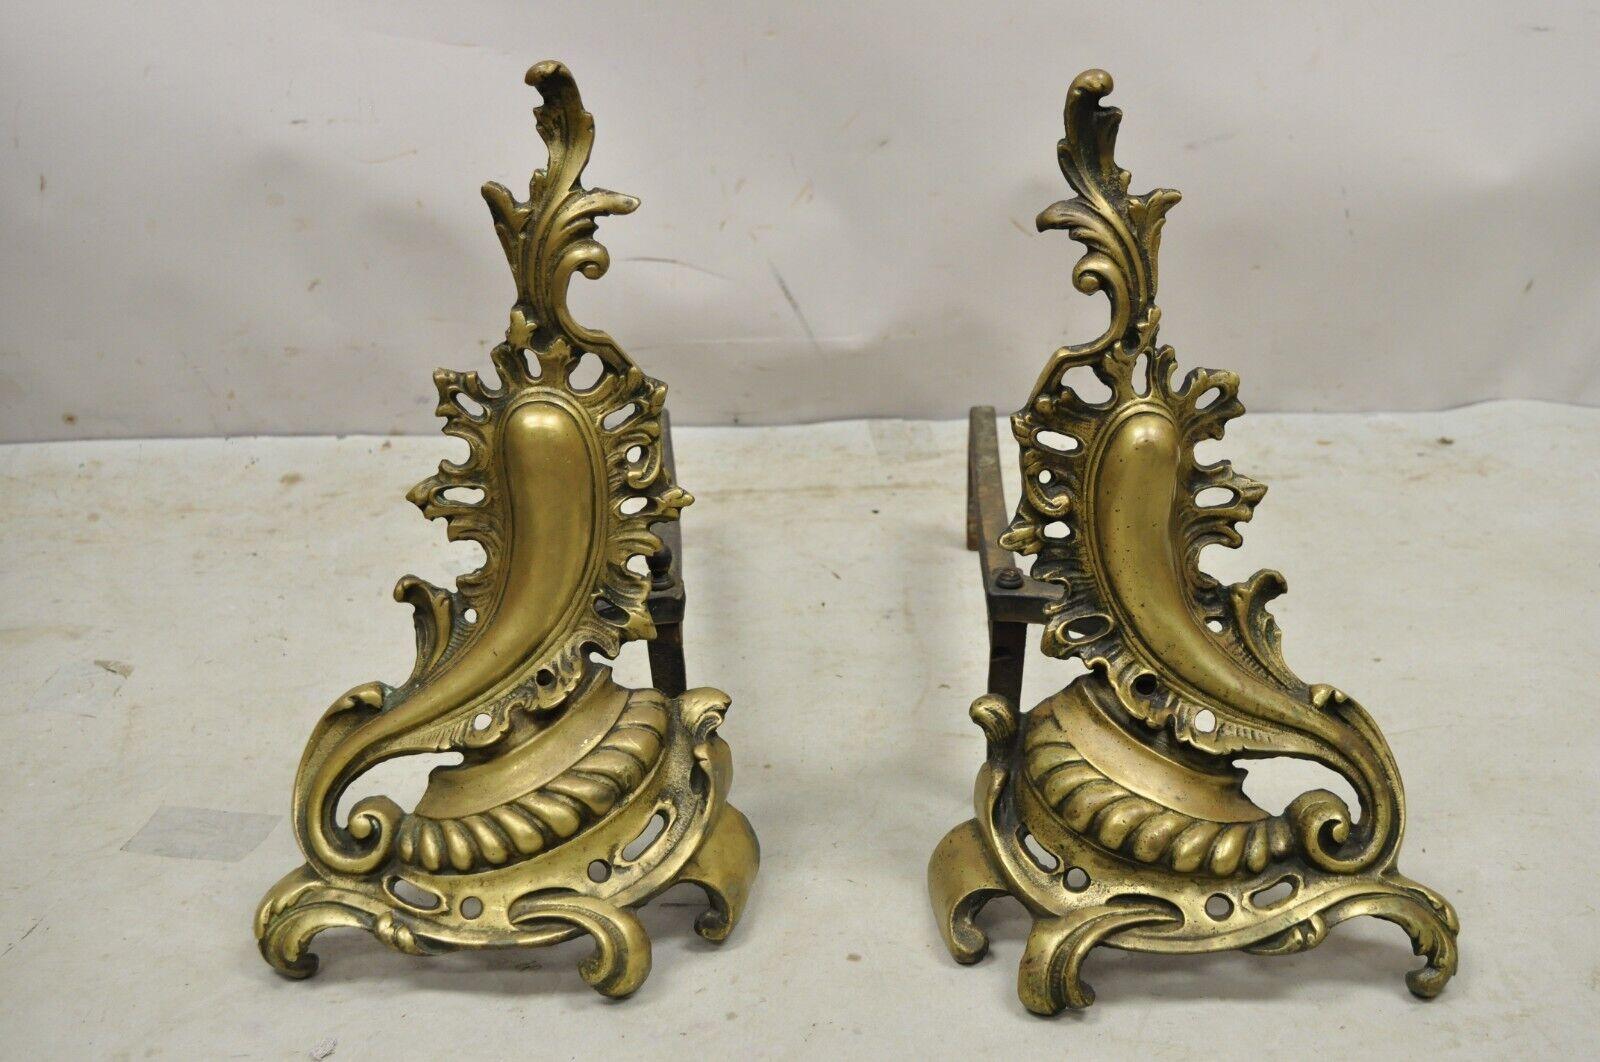 Antique French Rococo Baroque Style Brass Leafy Acanthus Andirons - a Pair For Sale 7